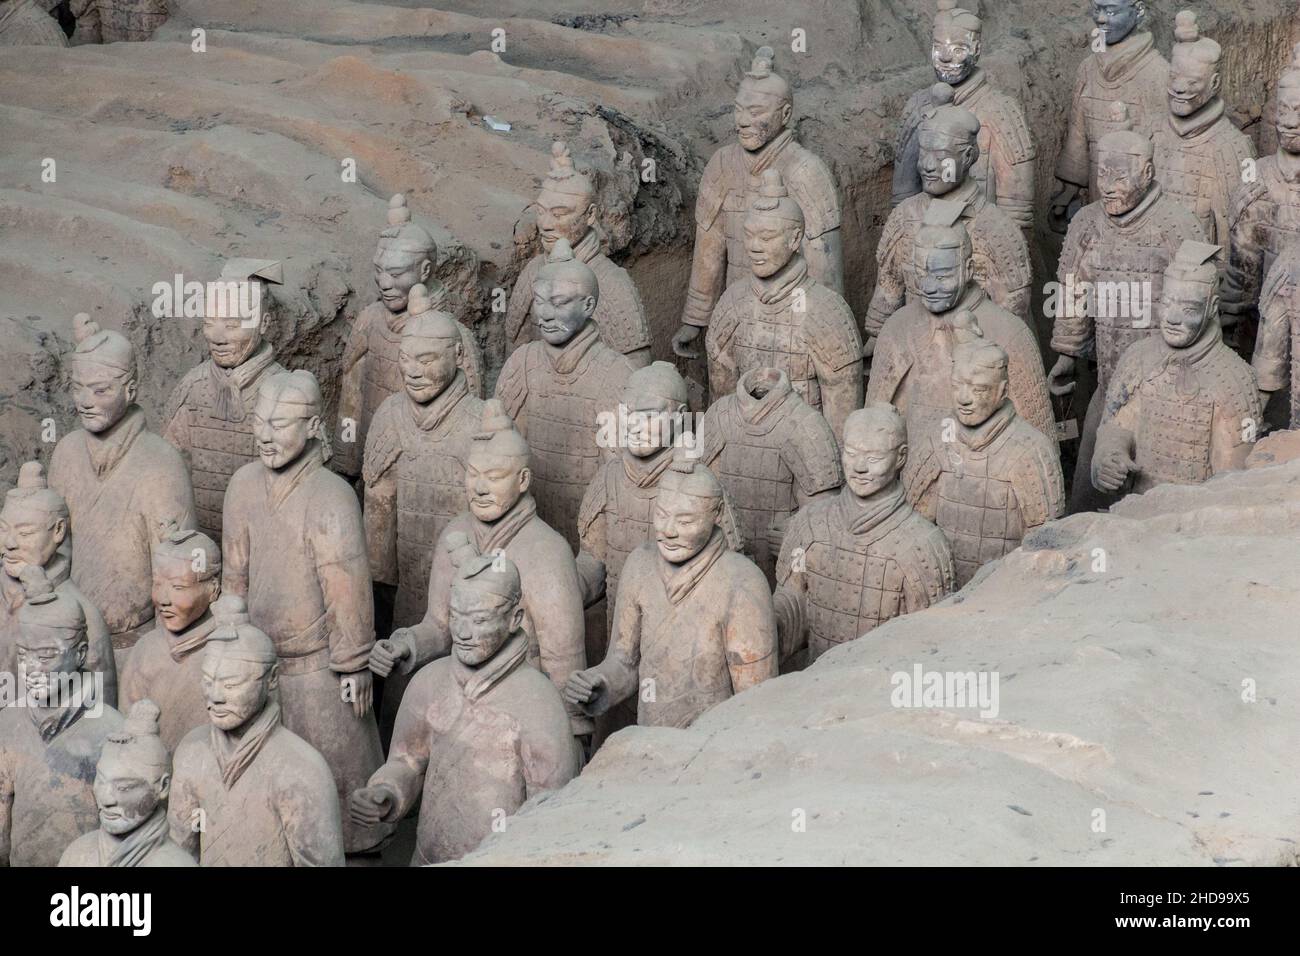 Soldiers in the Pit 1 of the Army of Terracotta Warriors near Xi'an, Shaanxi province, China Stock Photo